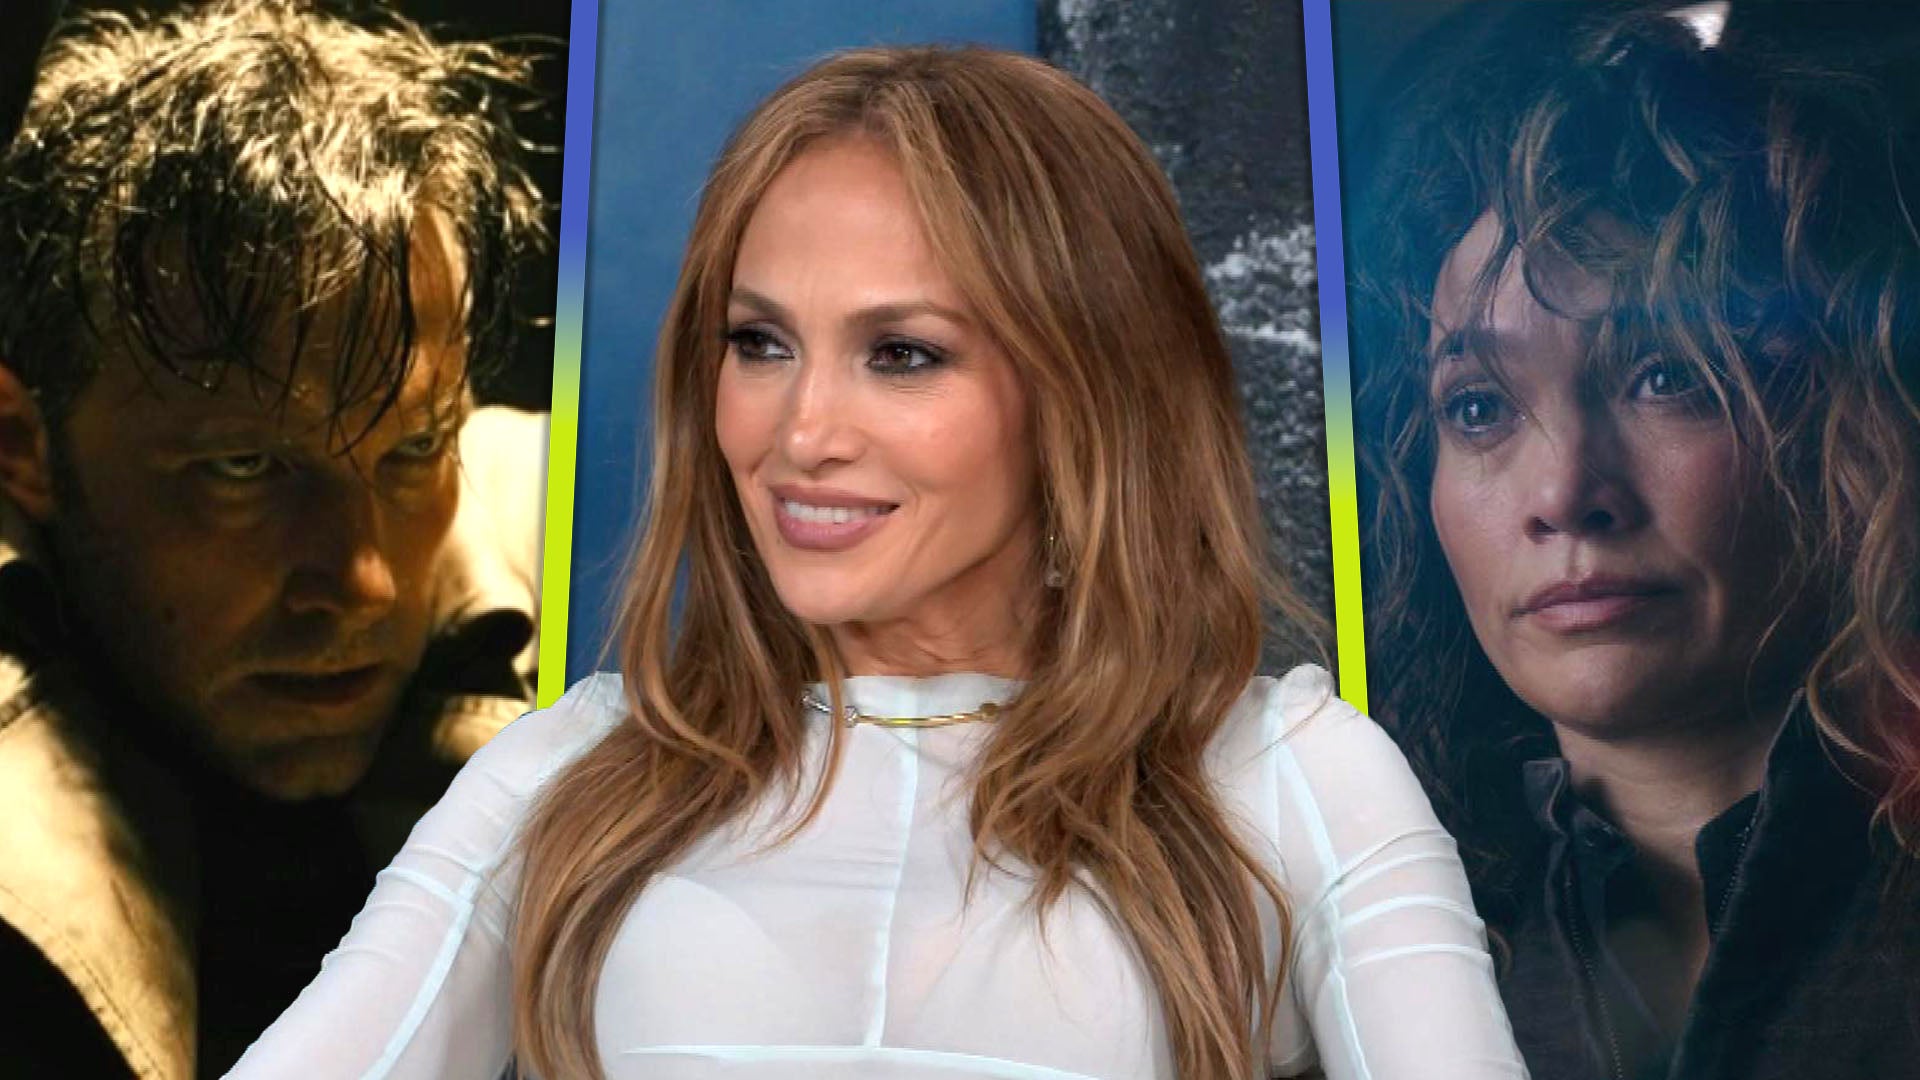 'Atlas': Jennifer Lopez on If She and Ben Affleck Train For Their Action Movies Together (Exclusive)